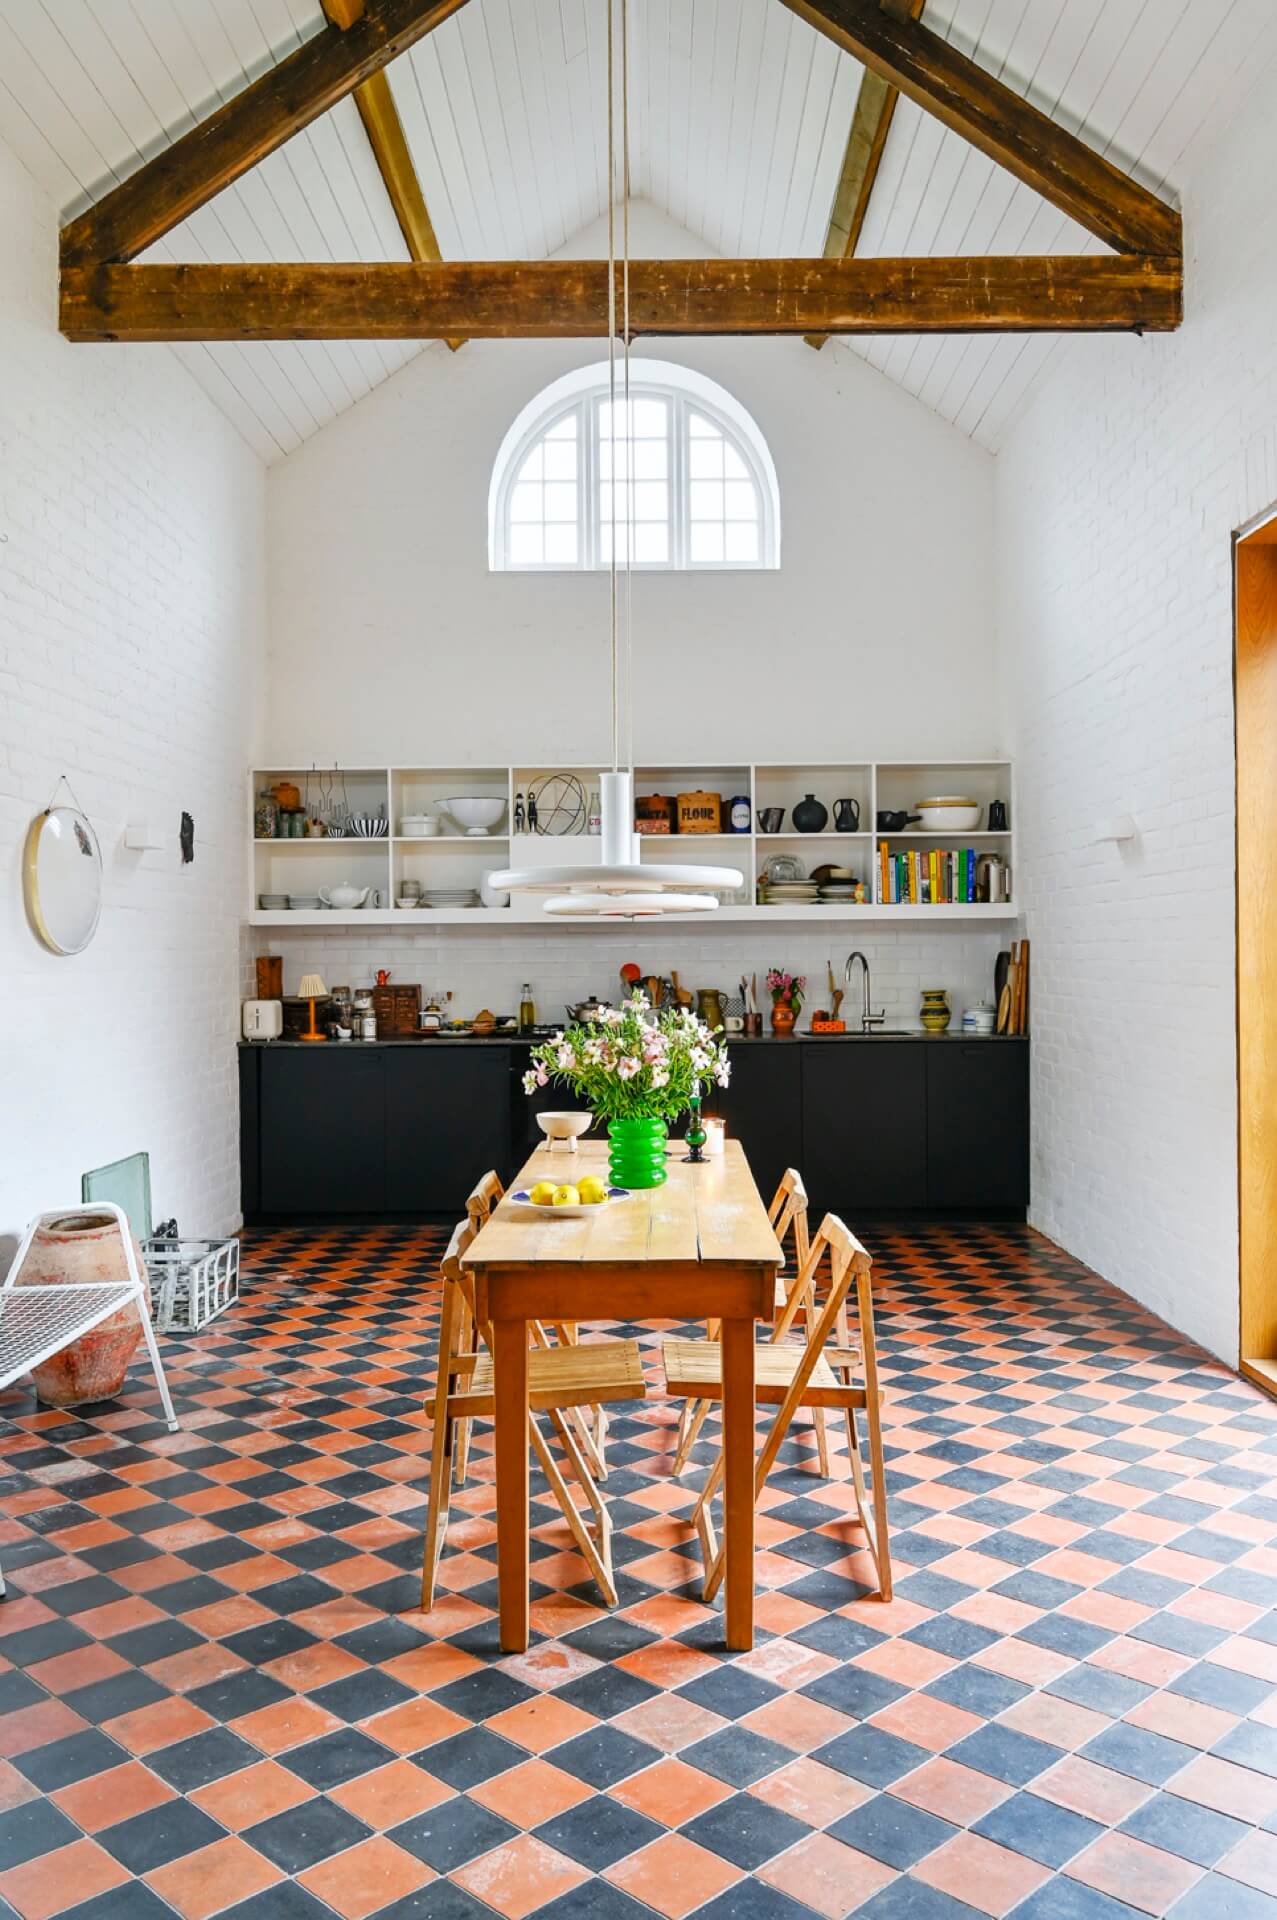 Sandy Suffield home tour - The Engine House, Suffolk - as featured in 91 Magazine Volume 15